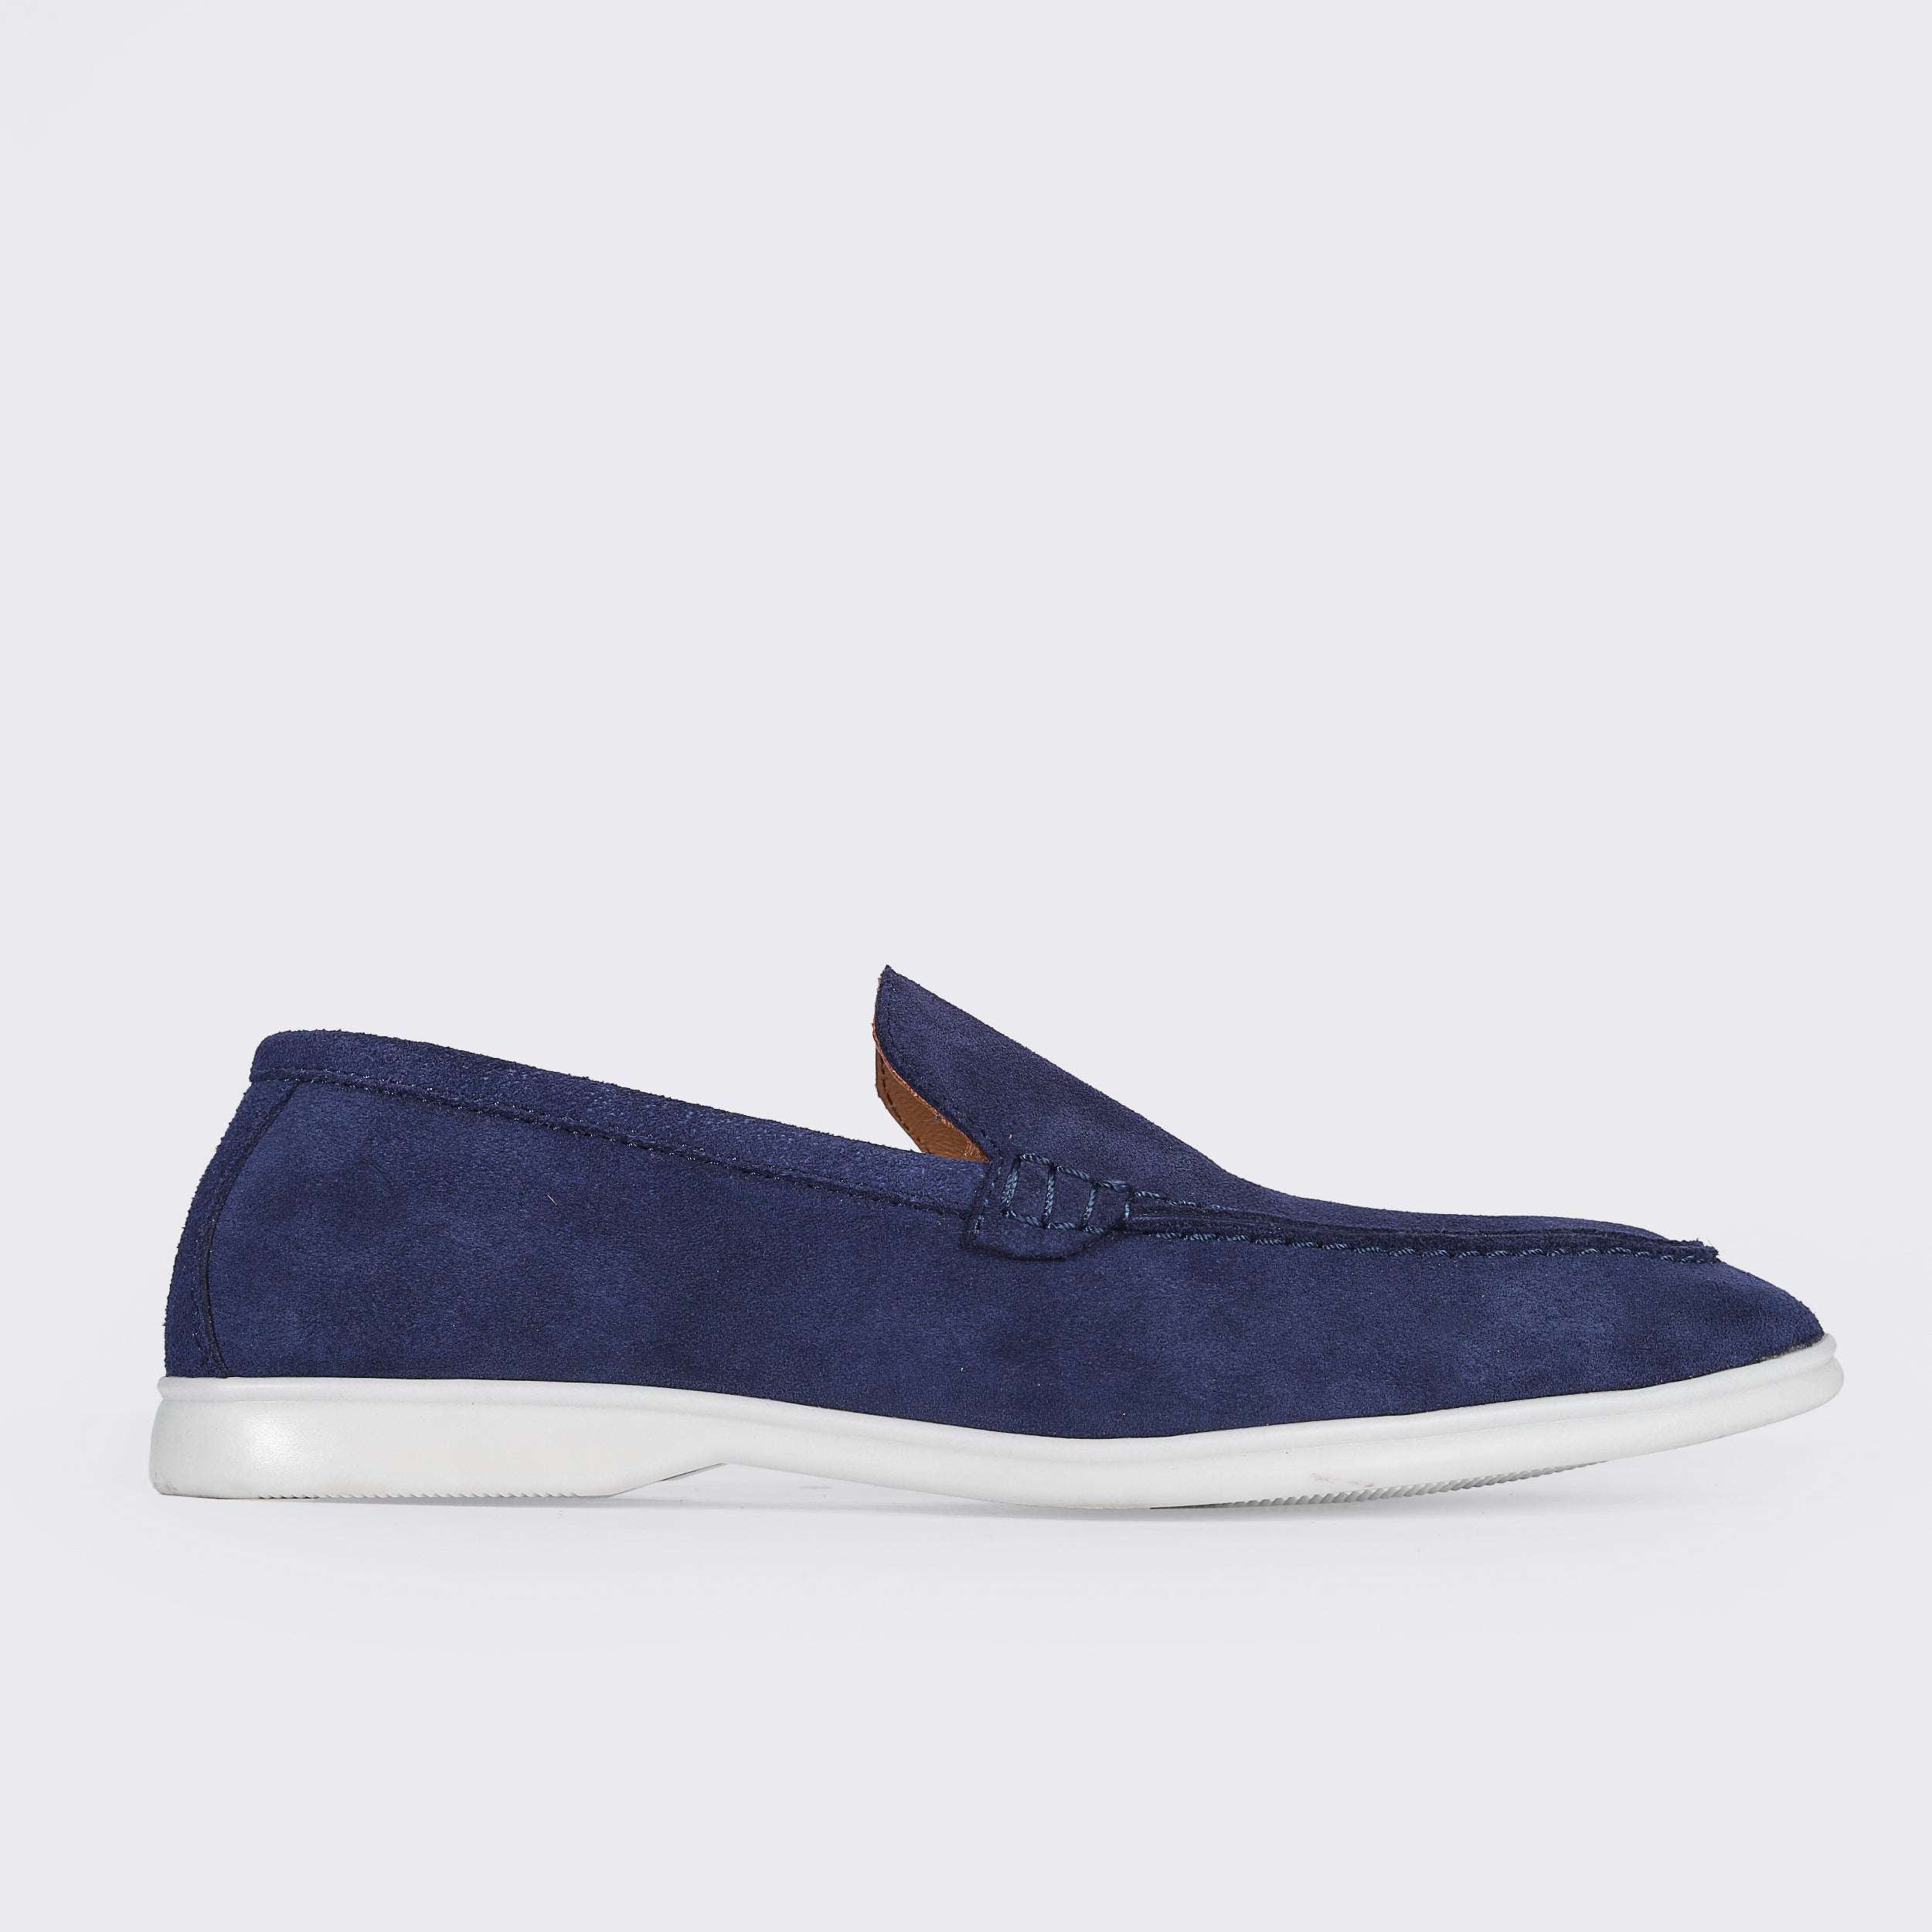 Heritage Suede Flat Loafers For Men Navy